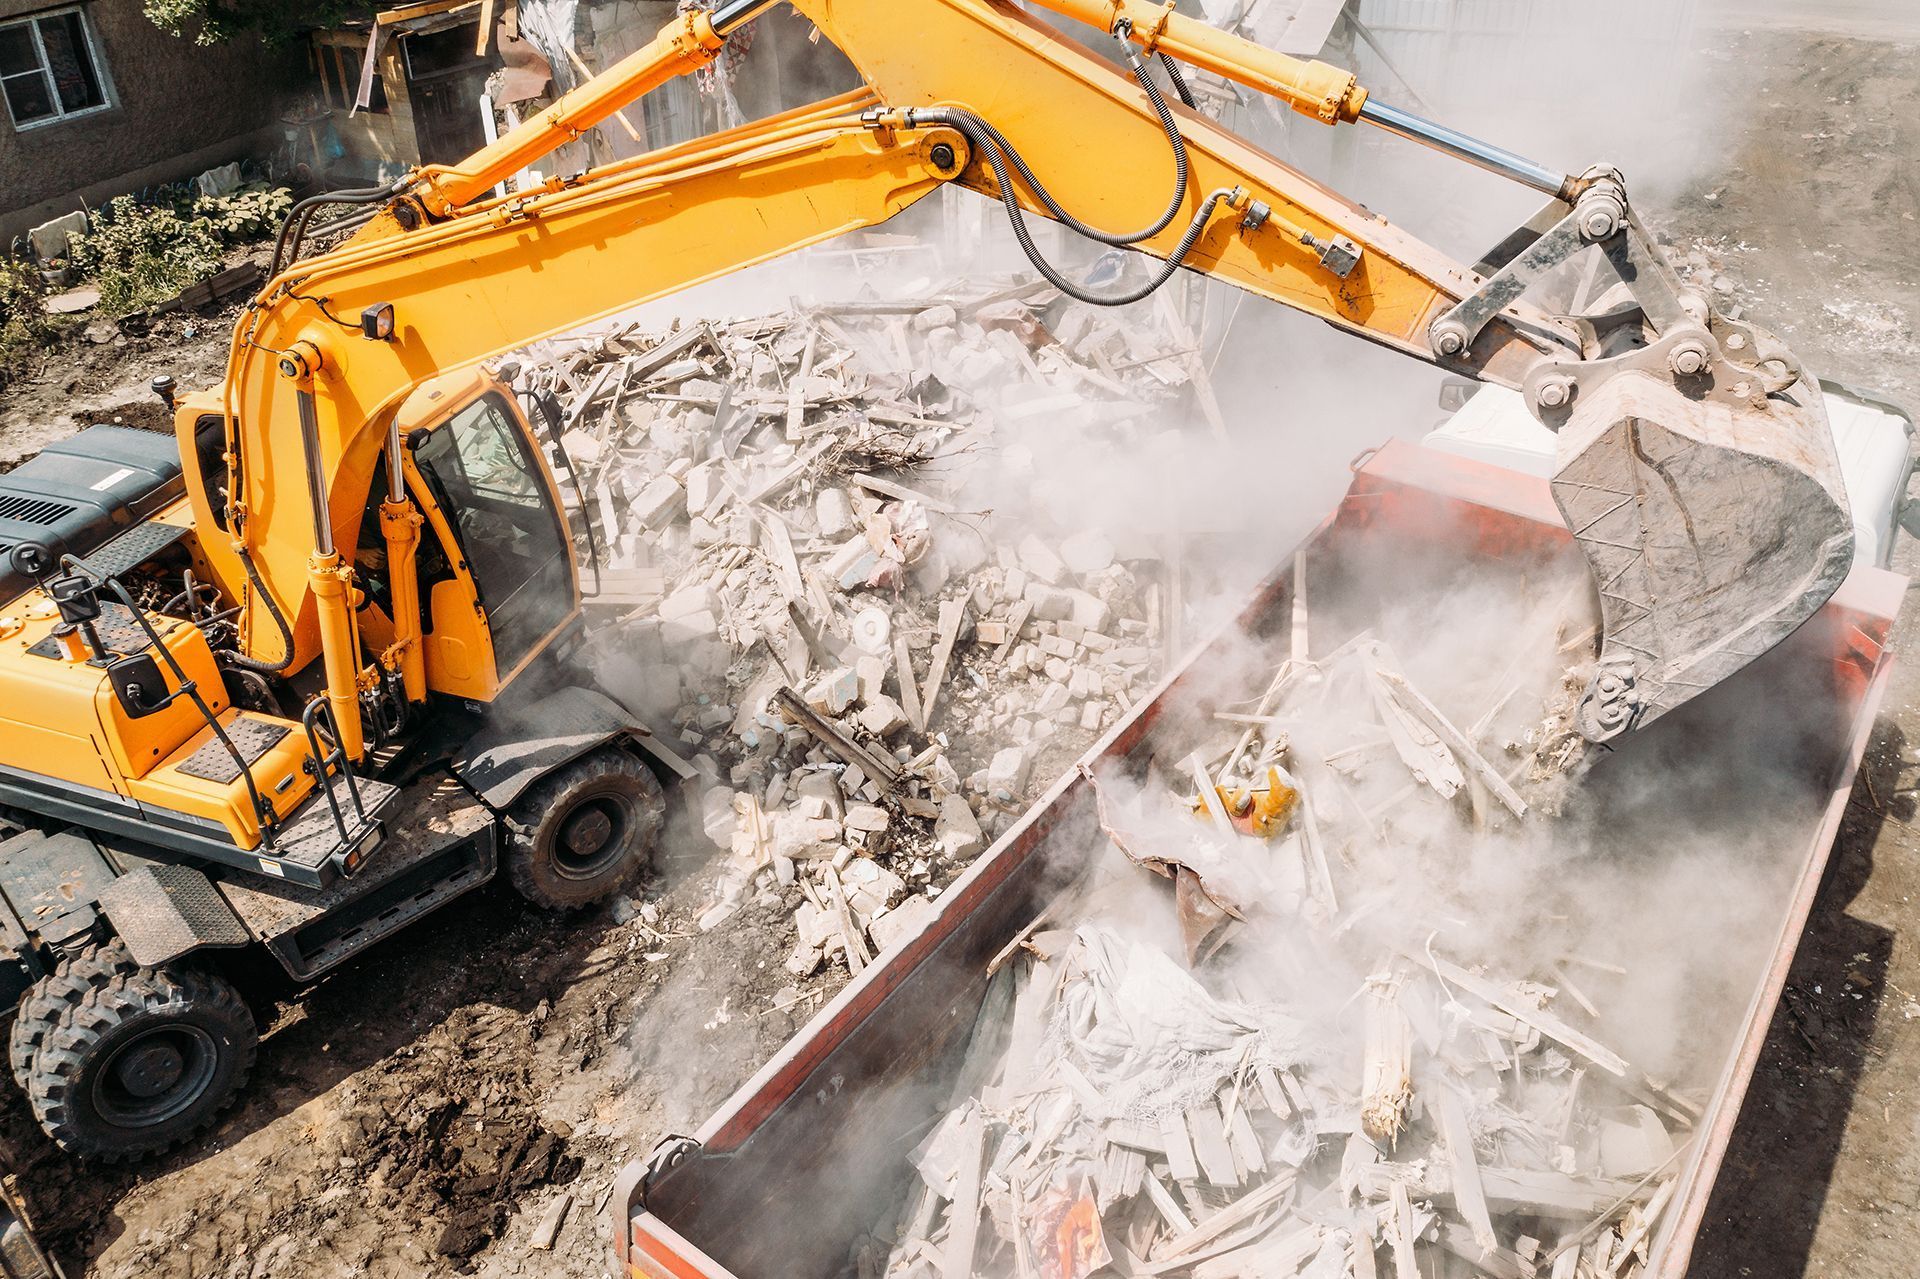 a yellow excavator is loading rubble into a dumpster